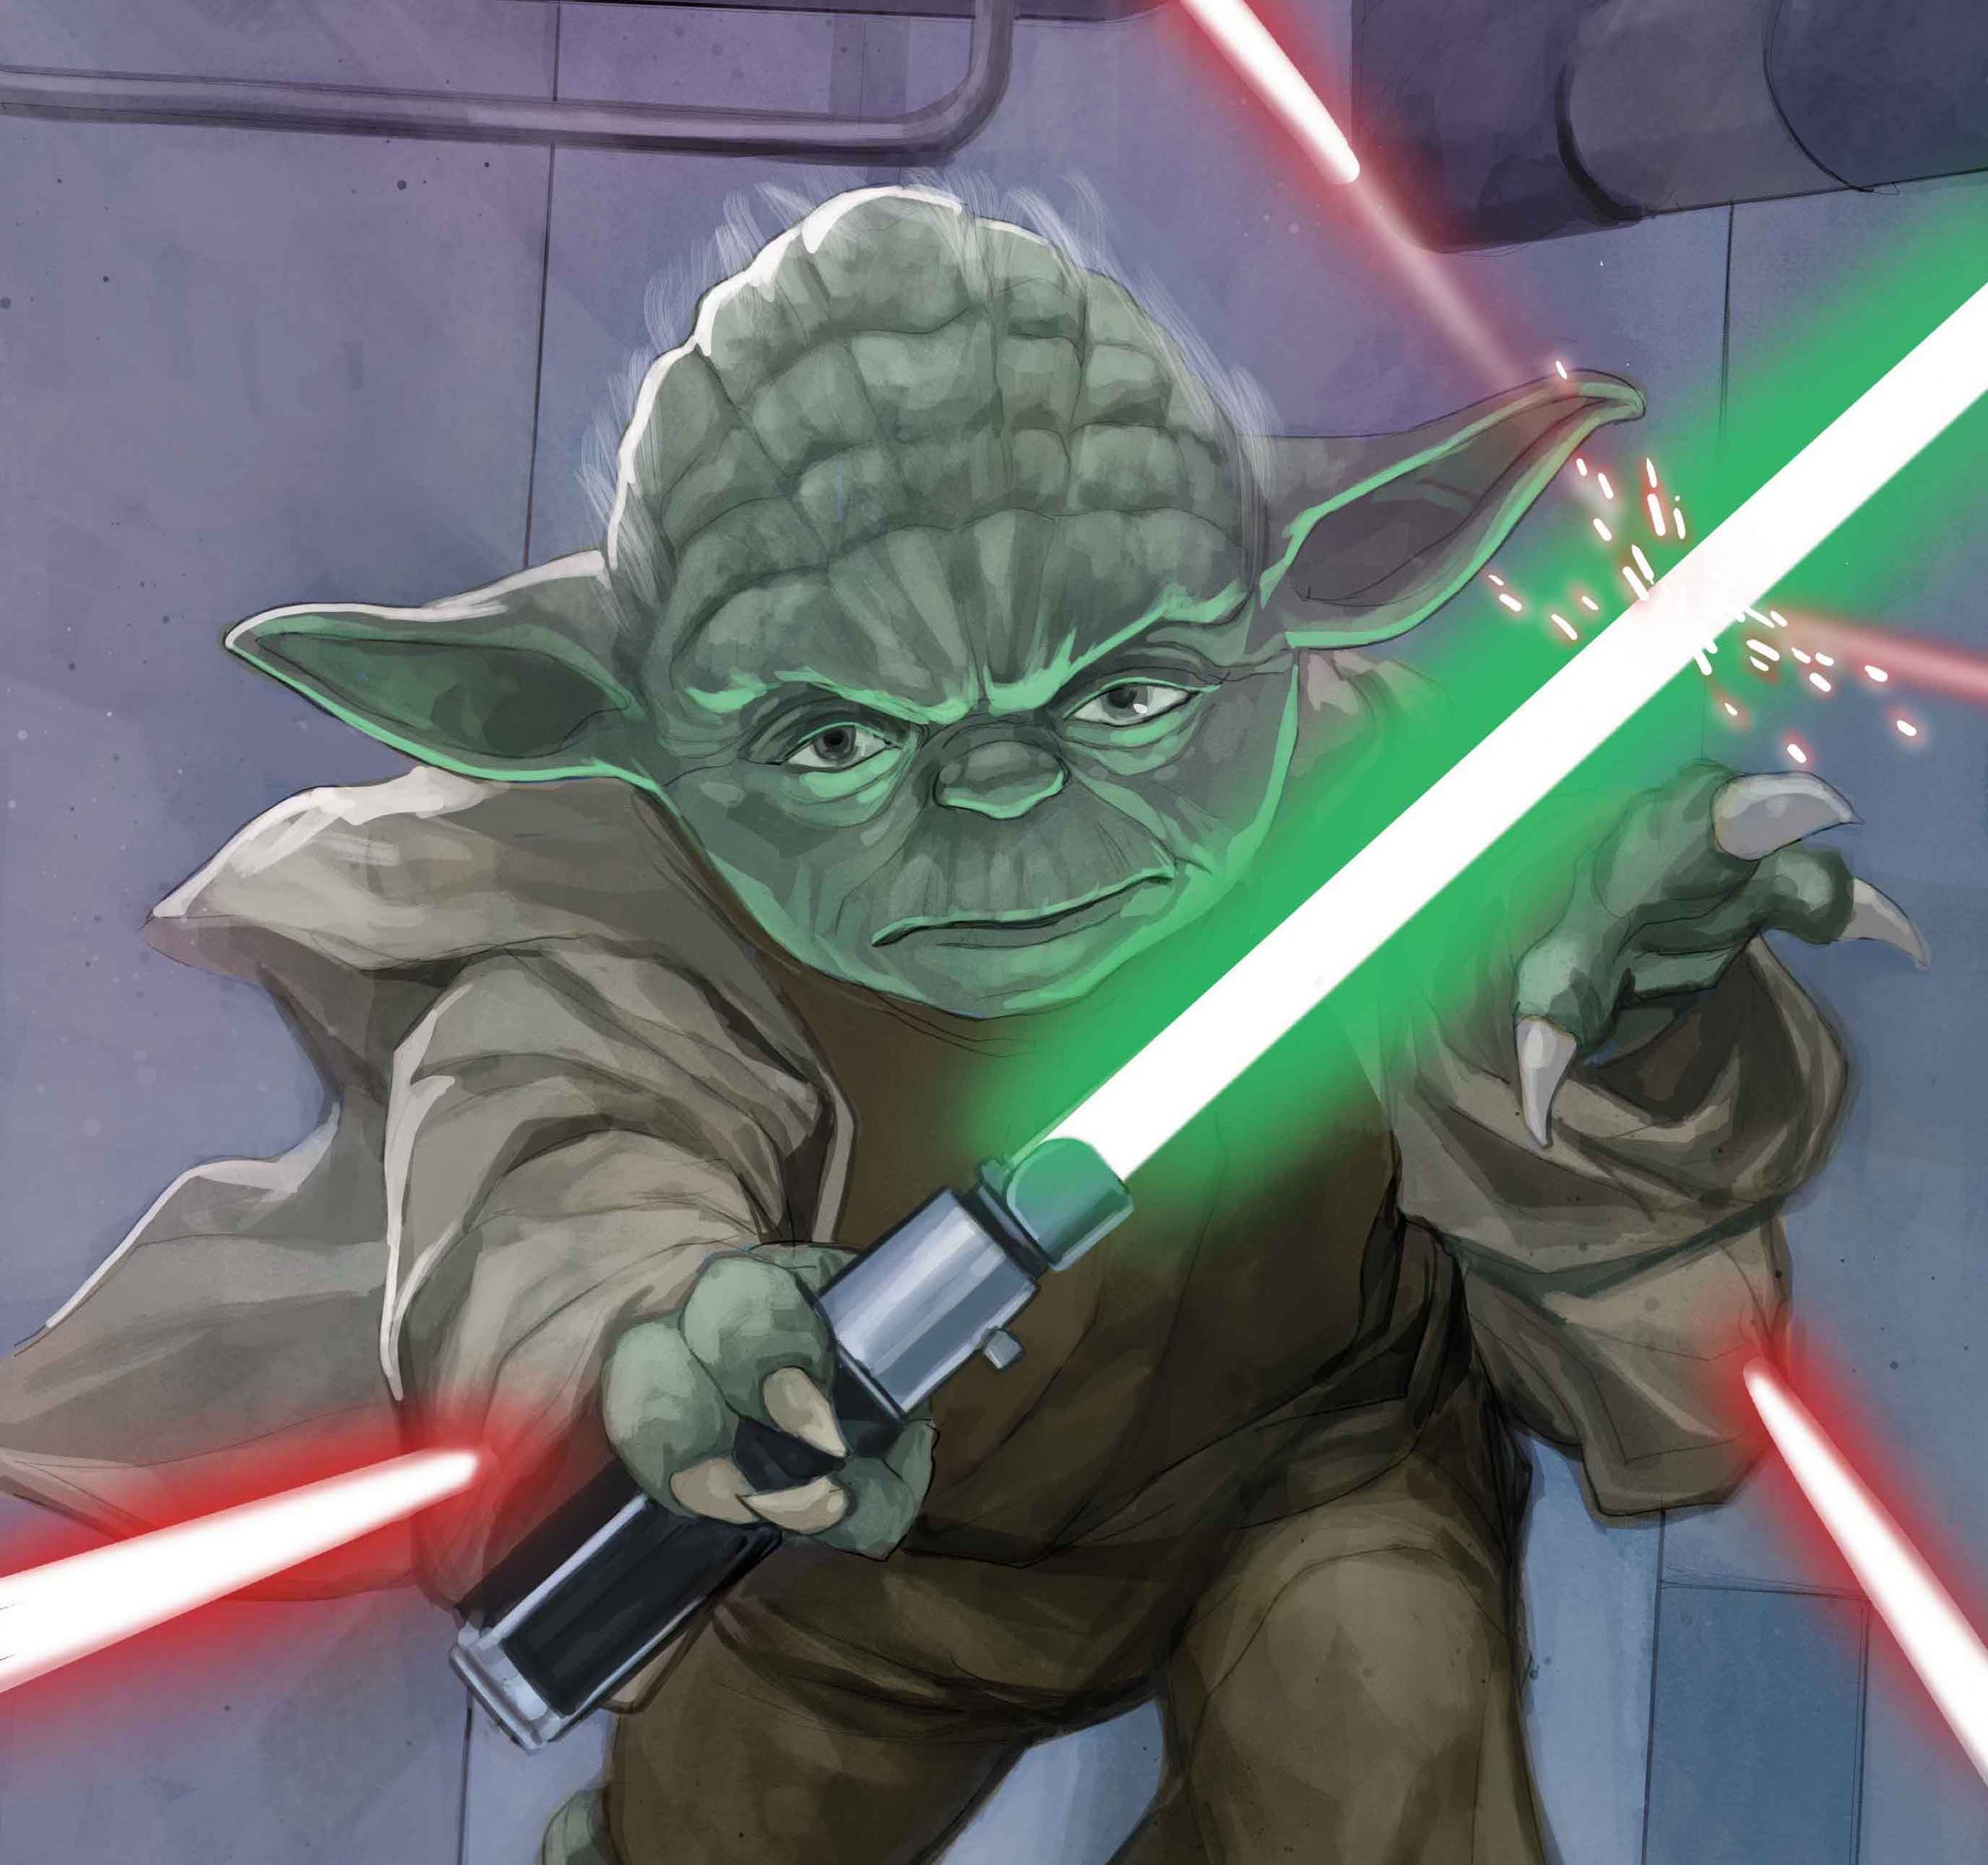 Ten-issue series 'Star Wars: Yoda' to explore Jedi Master’s storied history